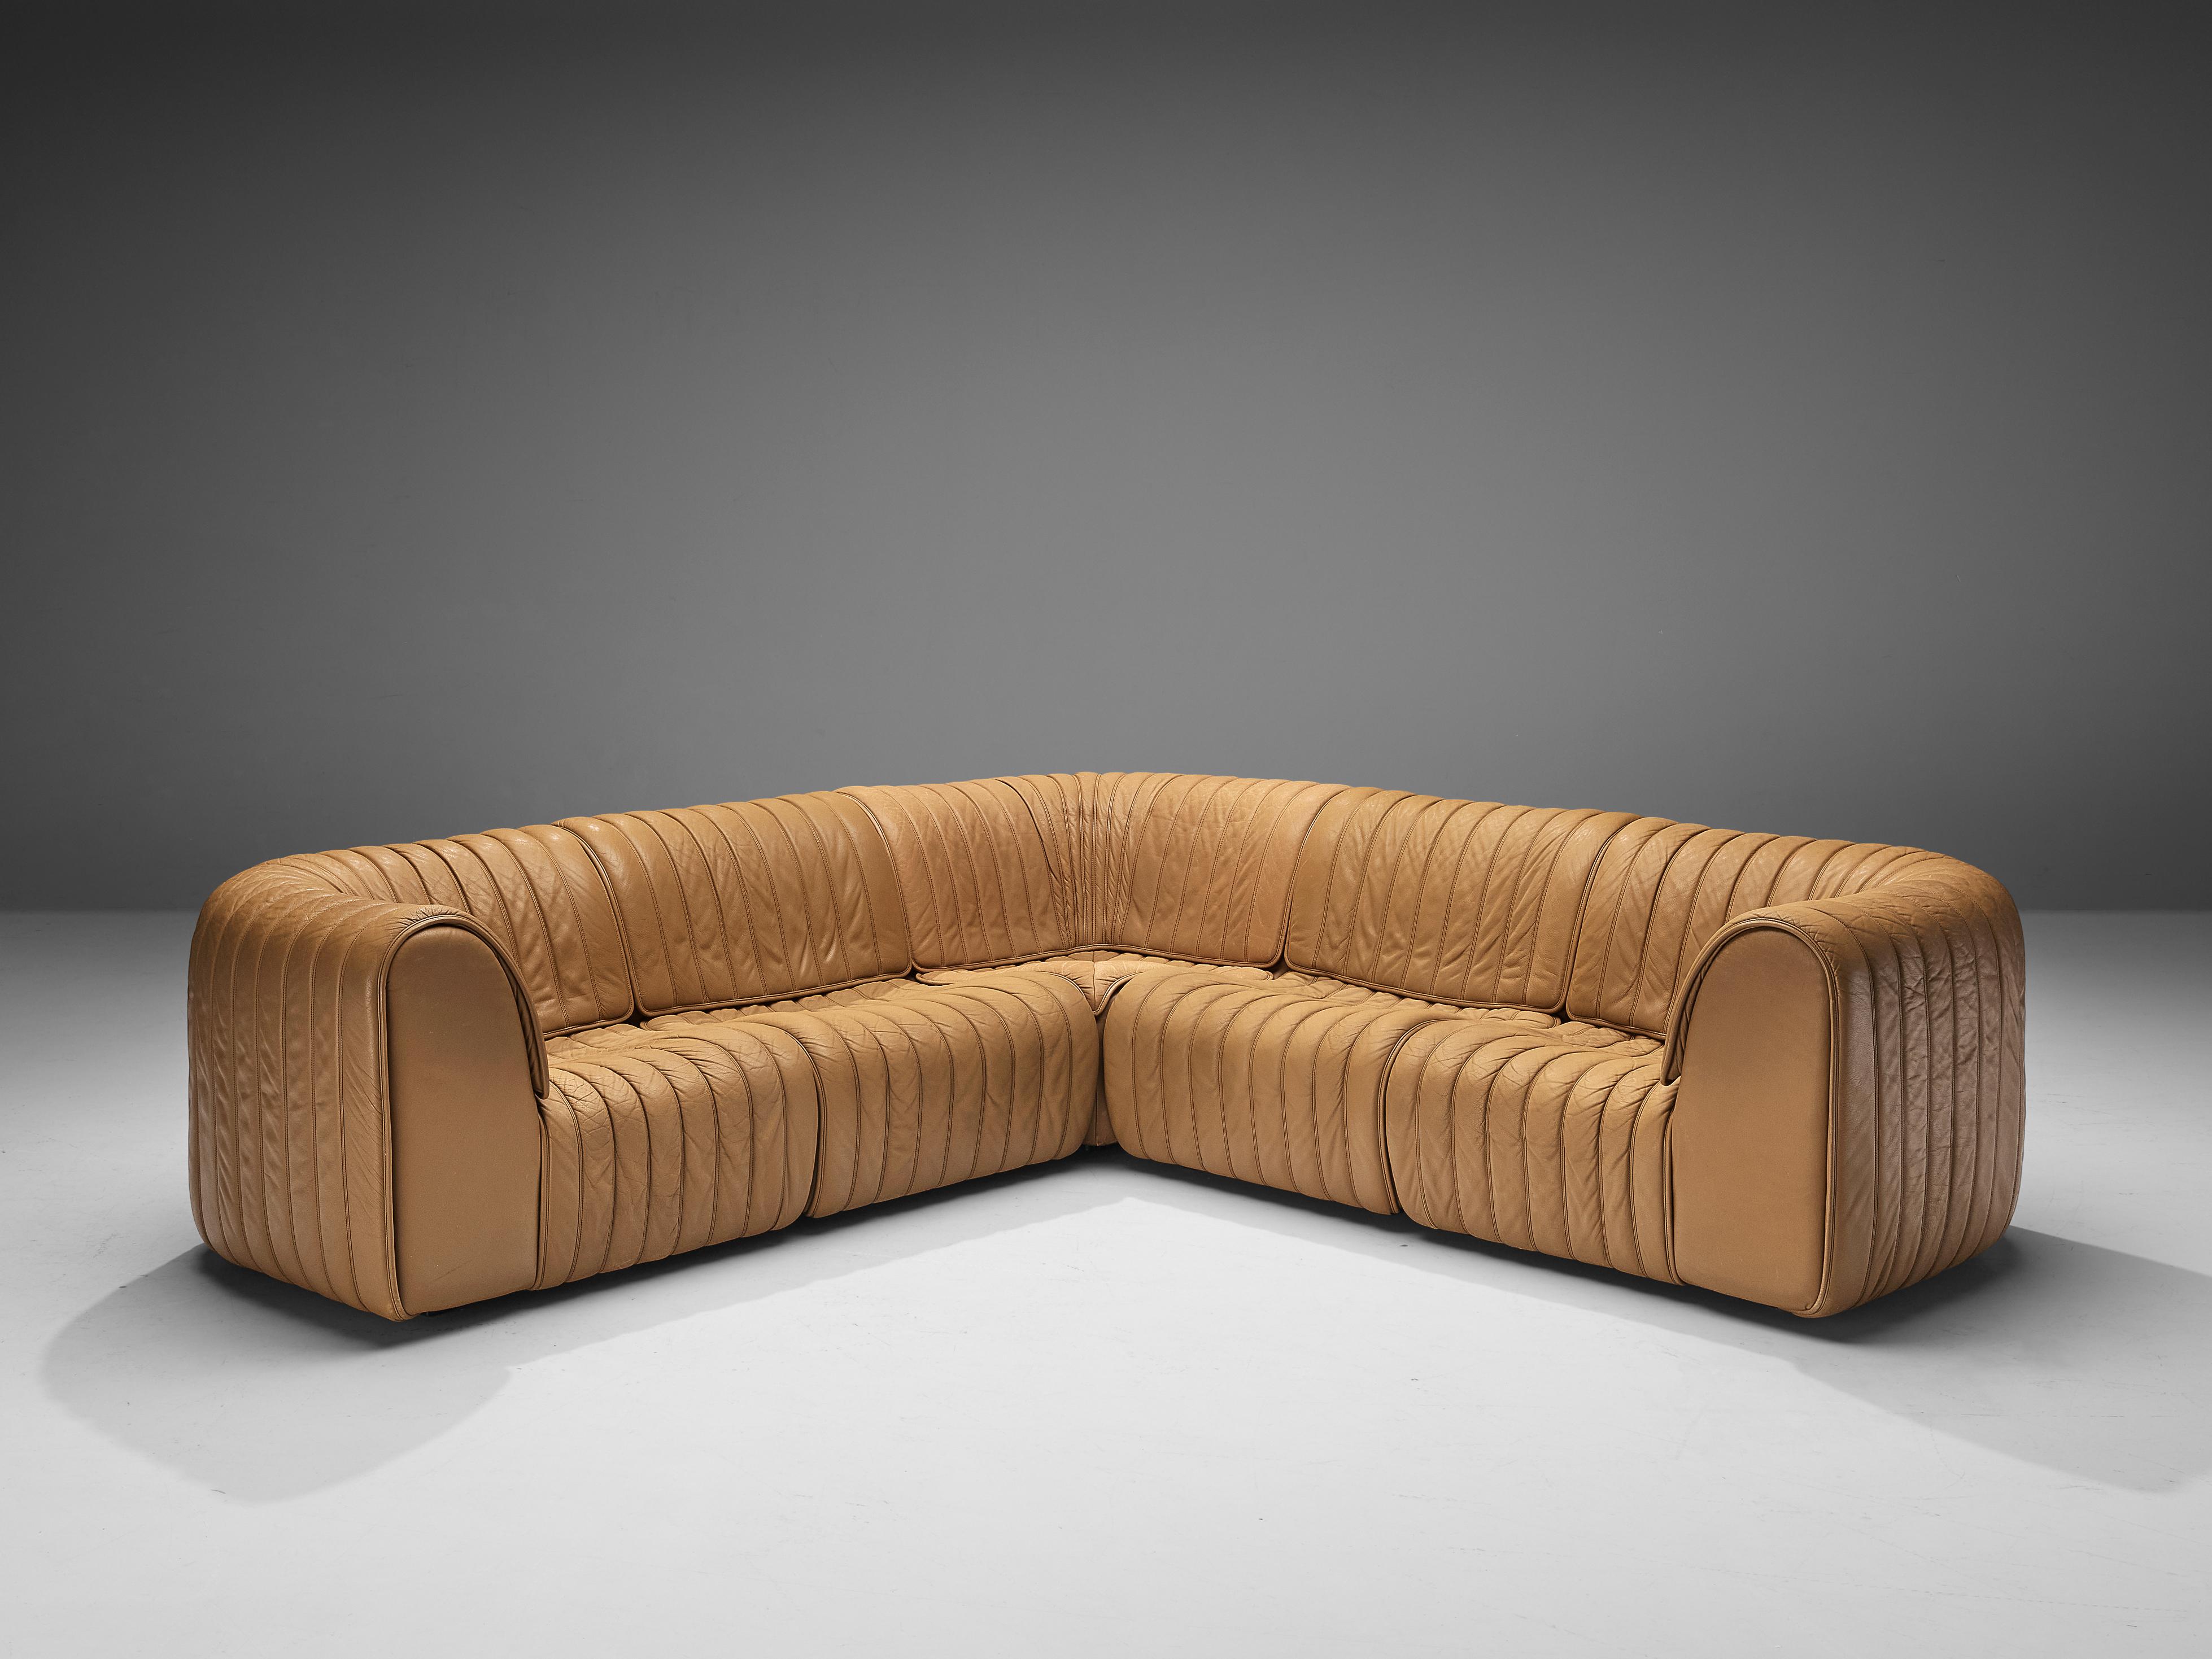 De Sede, ‘DS-22’ Modular sofa, leather, Switzerland, 1980s 

This high quality sectional sofa designed by De Sede in the 1980s contains one corner element, two regular elements, and two elements that are provided with armrests (but can also be